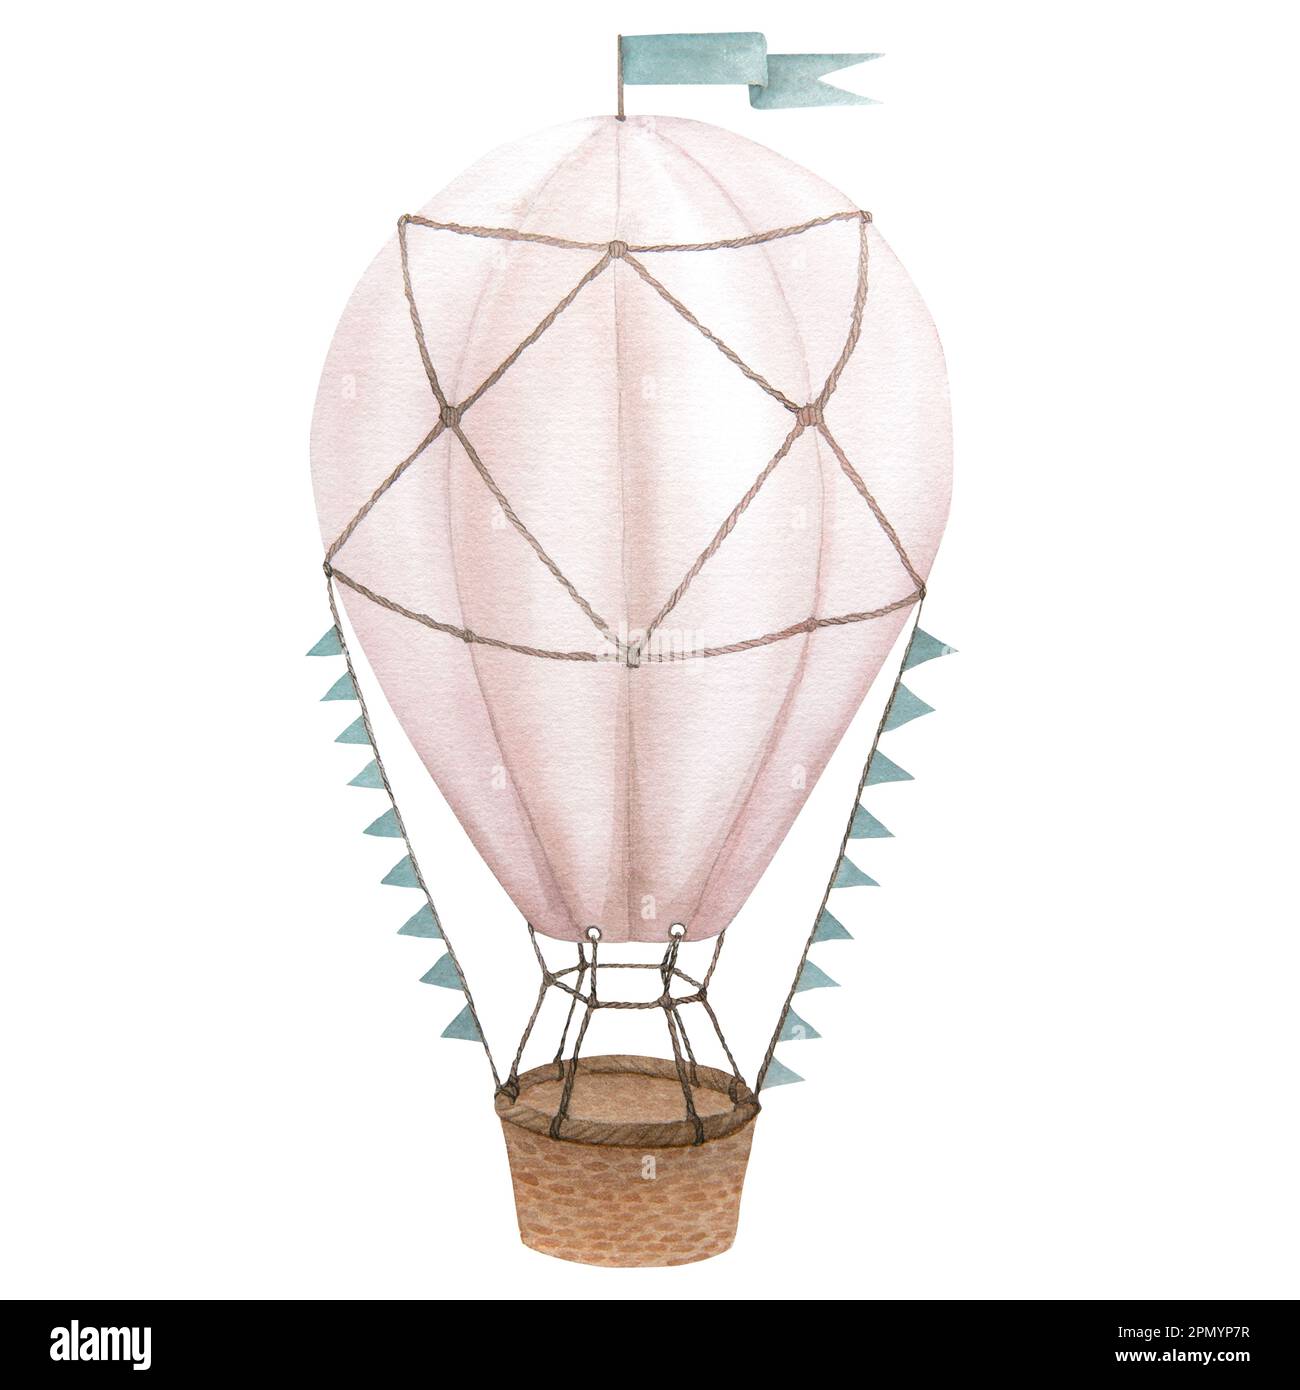 Watercolor illustration of an air balloon isolated on a white background. Vintage cartoon aerostat with flags in brown, pink and turquoise colors. Can Stock Photo